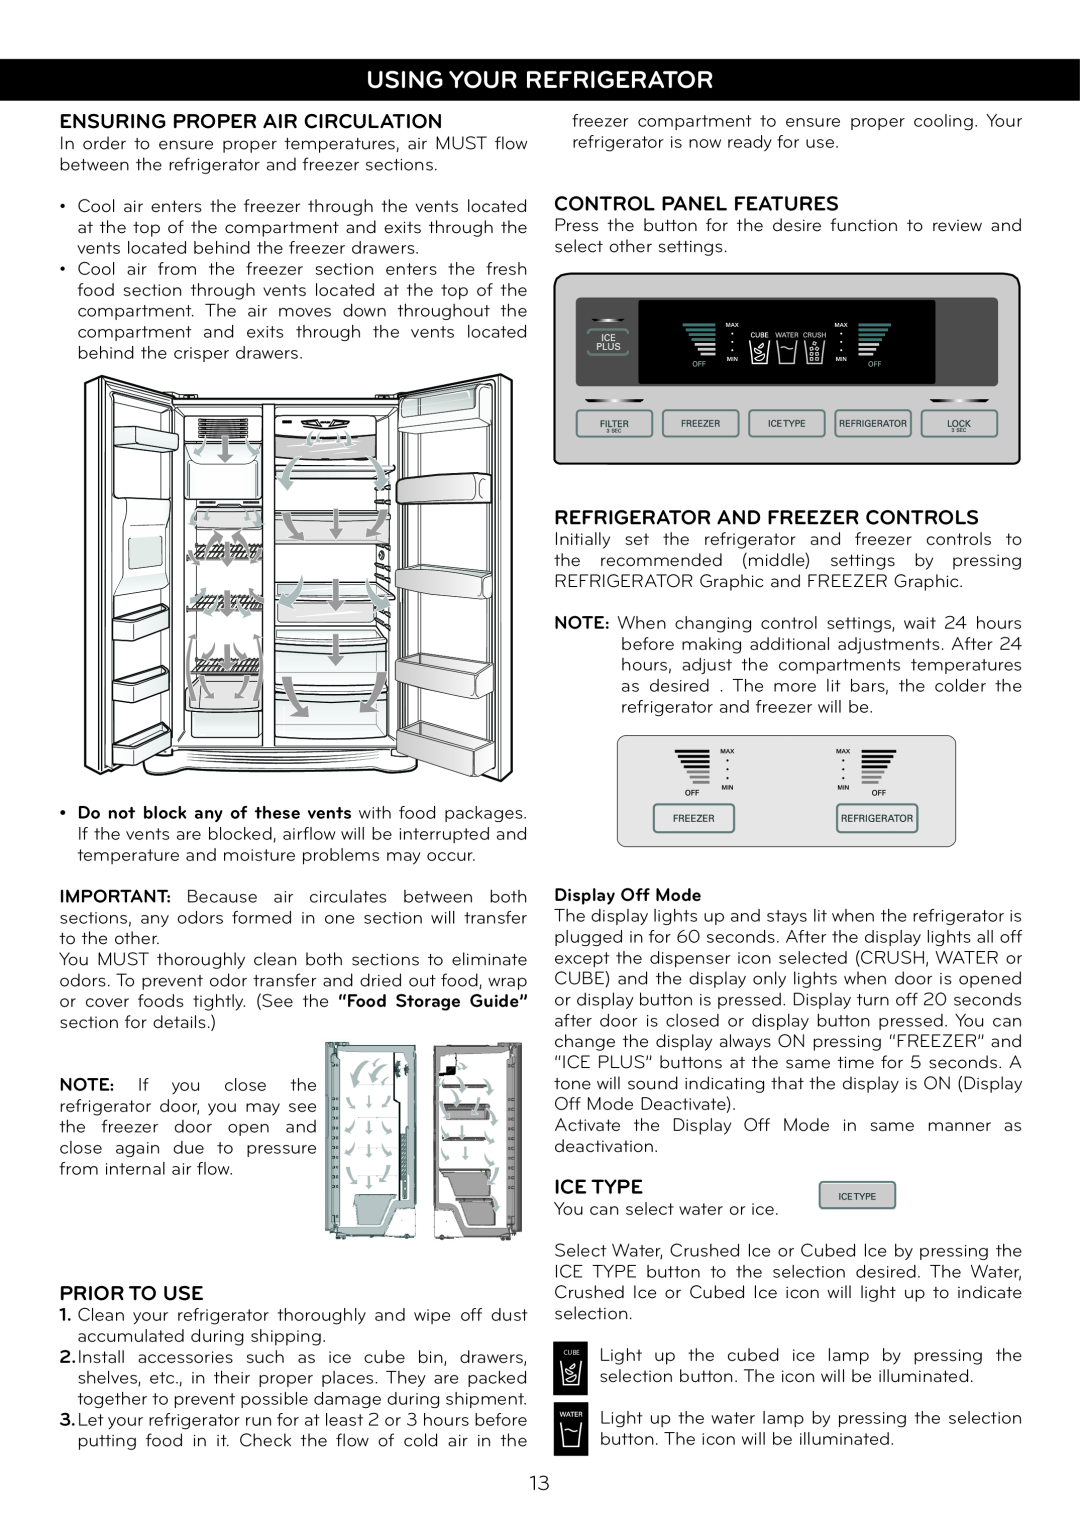 LG Electronics LSC27925** Using Your Refrigerator, Ensuring Proper Air Circulation, Control Panel Features, Prior To Use 